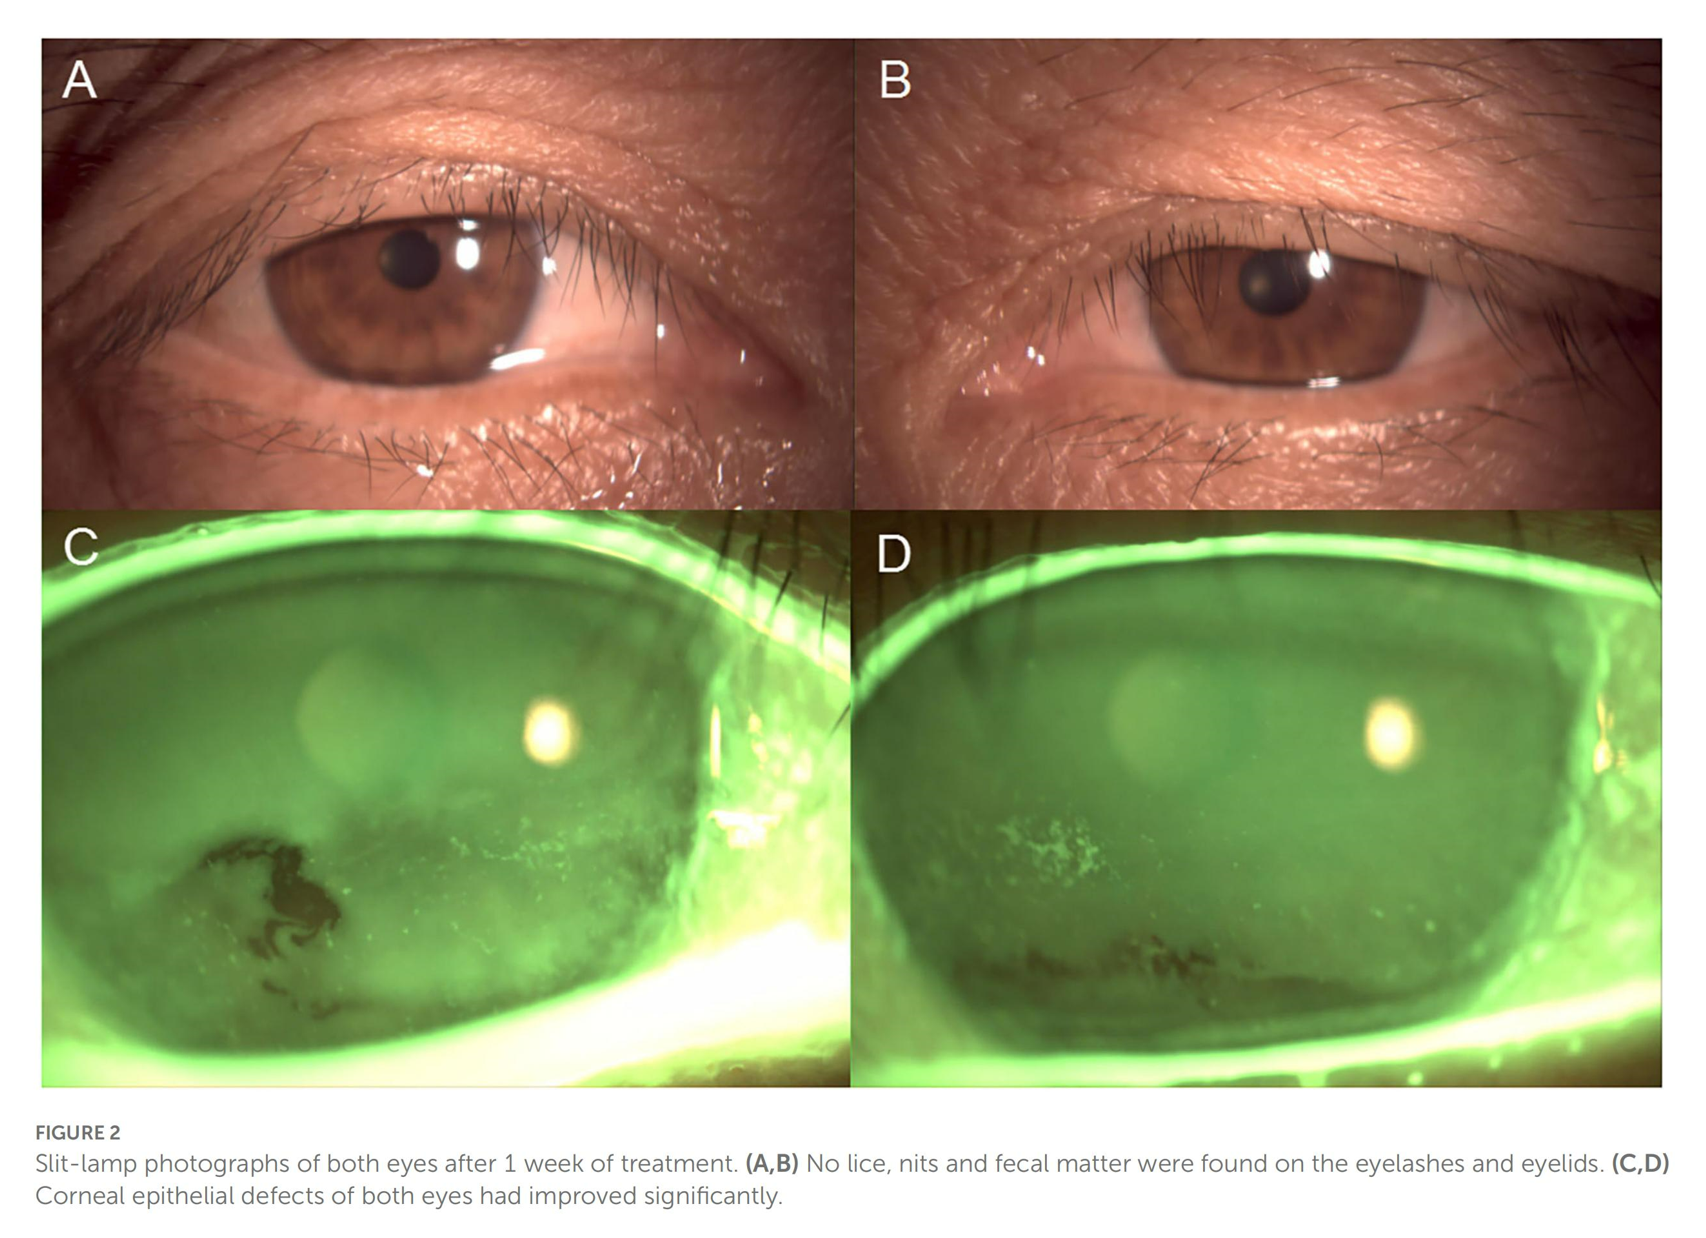 Case report: A case of corneal epithelial injury associated with Pthiriasis palpebrarum